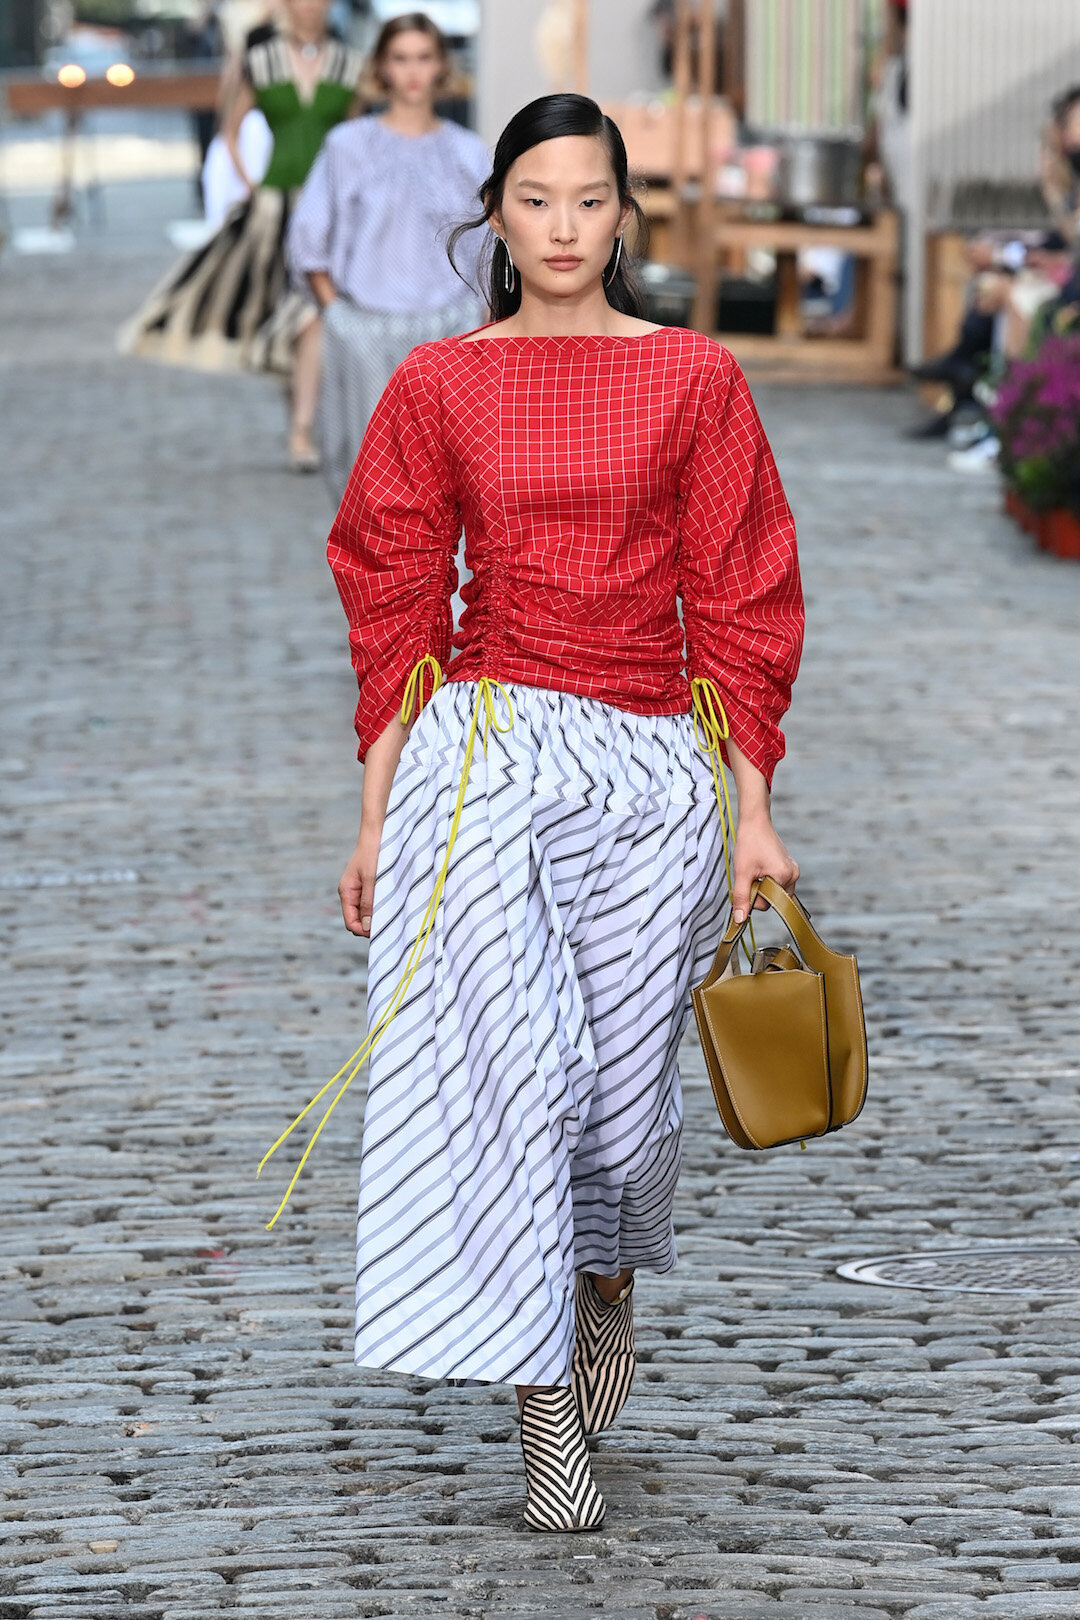 Tory Burch Spring/Summer 2022 Inspiration And Show Notes — SSI Life